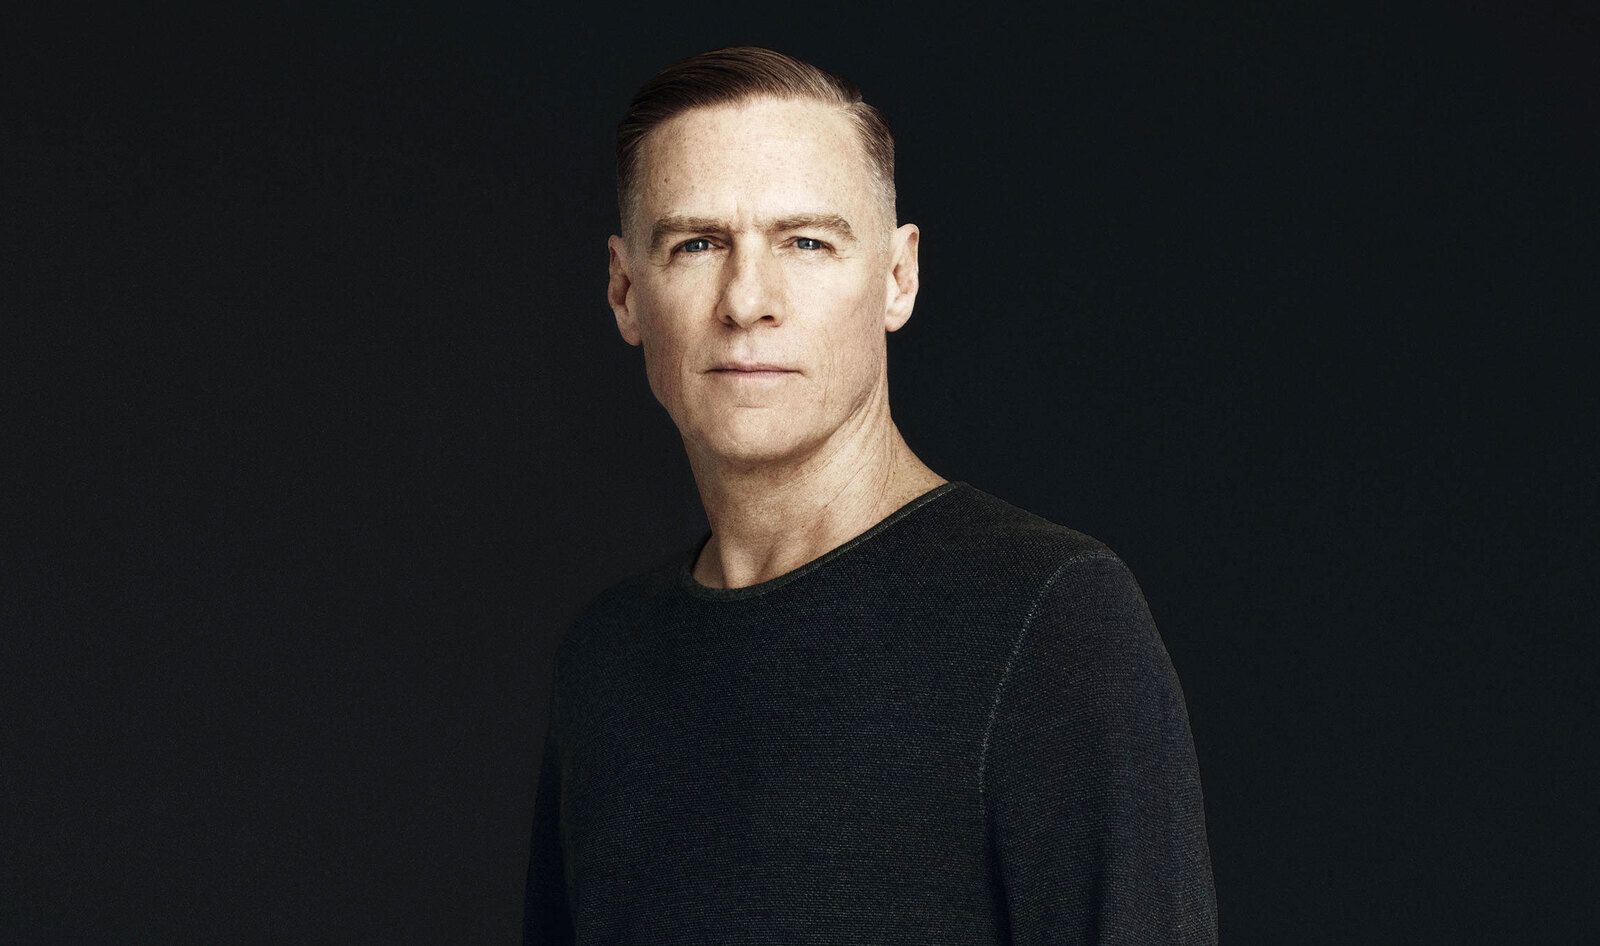 Vegan Singer Bryan Adams Says Humans Are “the Most Dangerous Creature on Earth”